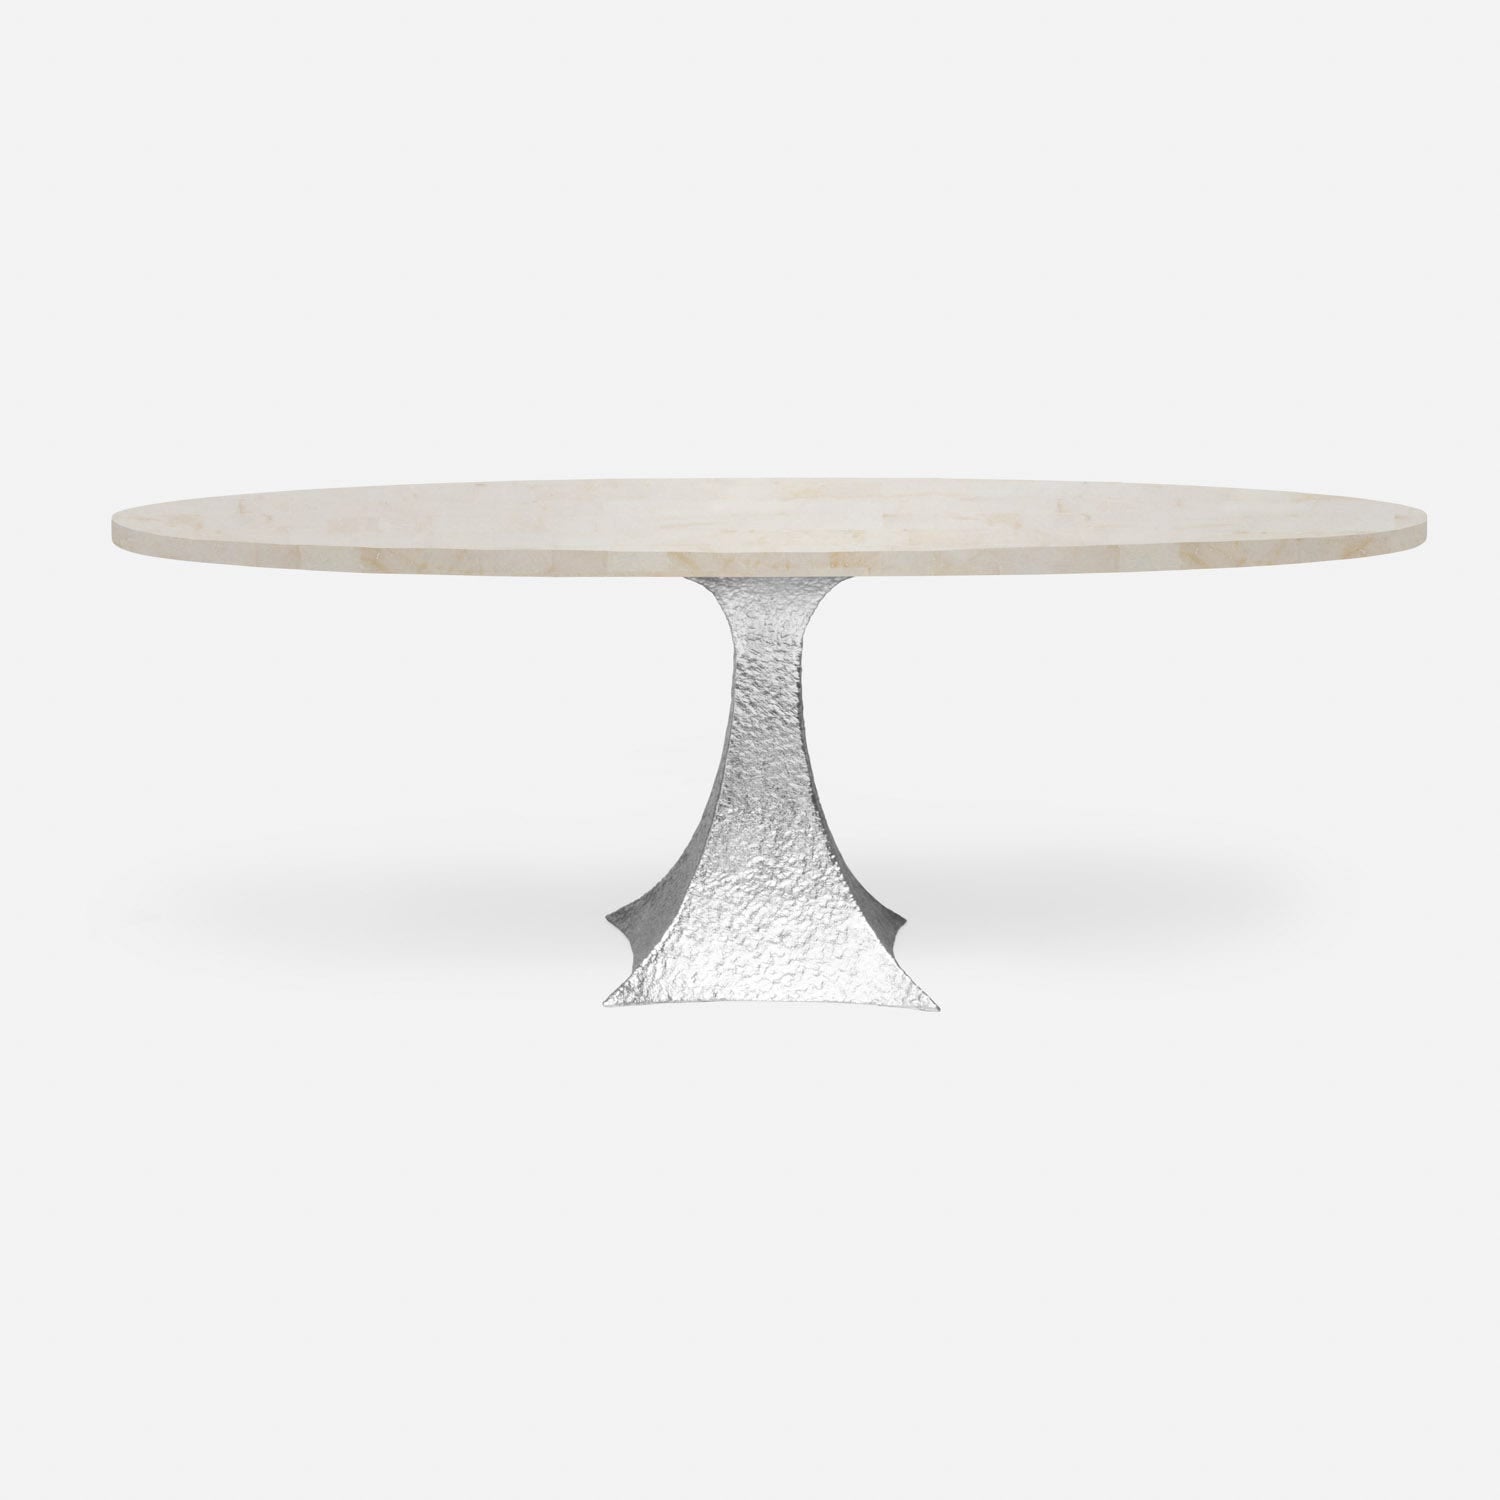 Made Goods Noor 72" x 42" x 30" Single Base Bumpy Cool Silver Iron Dinning Table With Oval Ice Crystal Stone Table Top